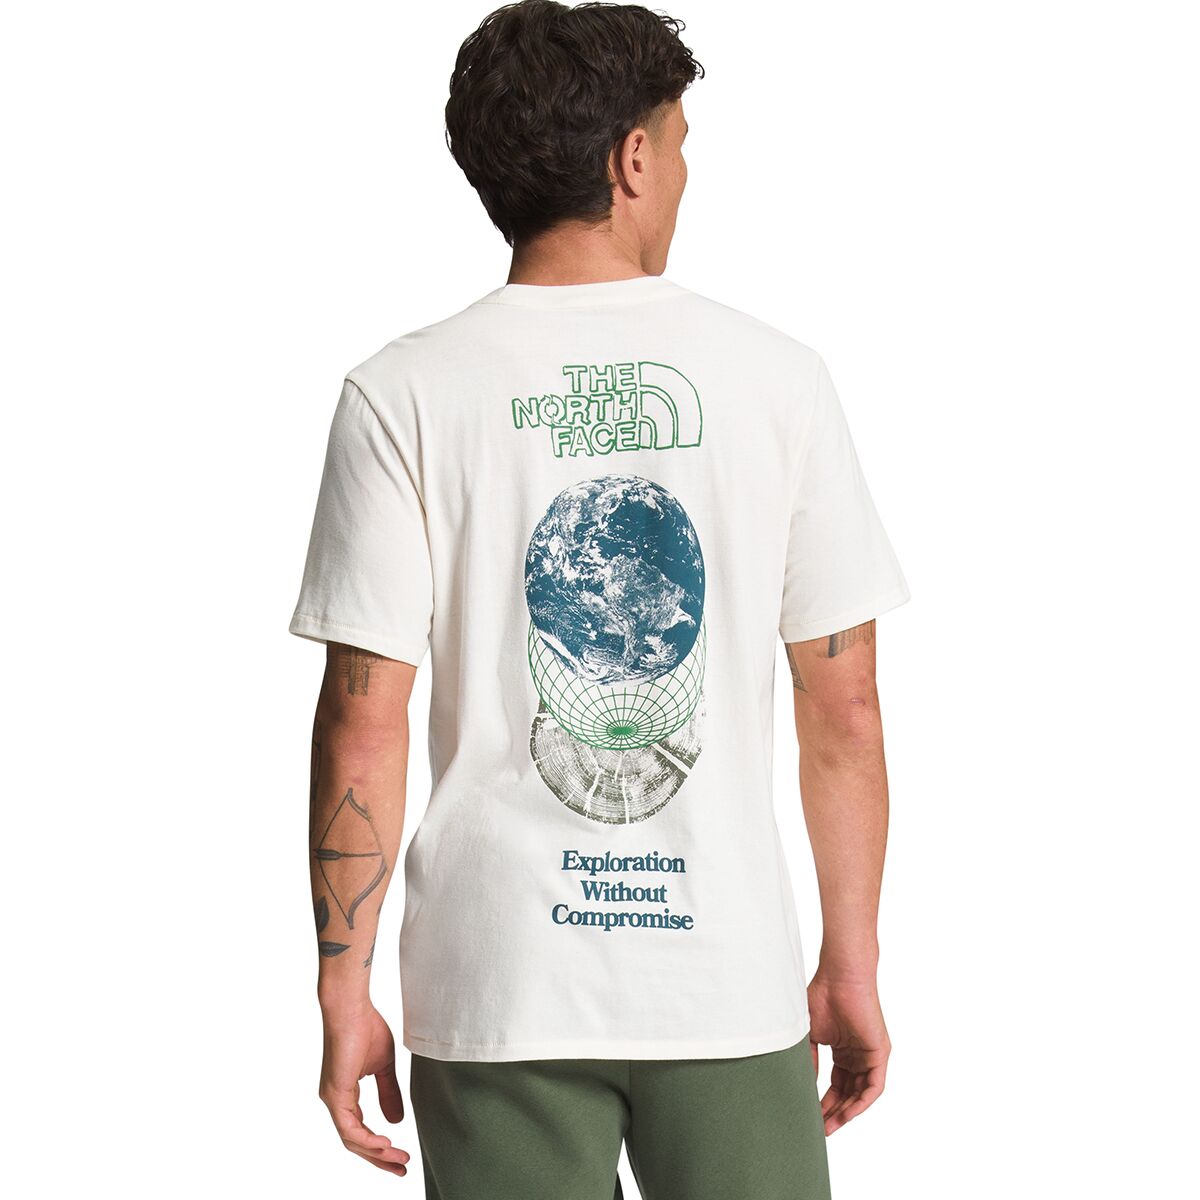 The North Face Earth Day Short-Sleeve T-Shirt - Men's